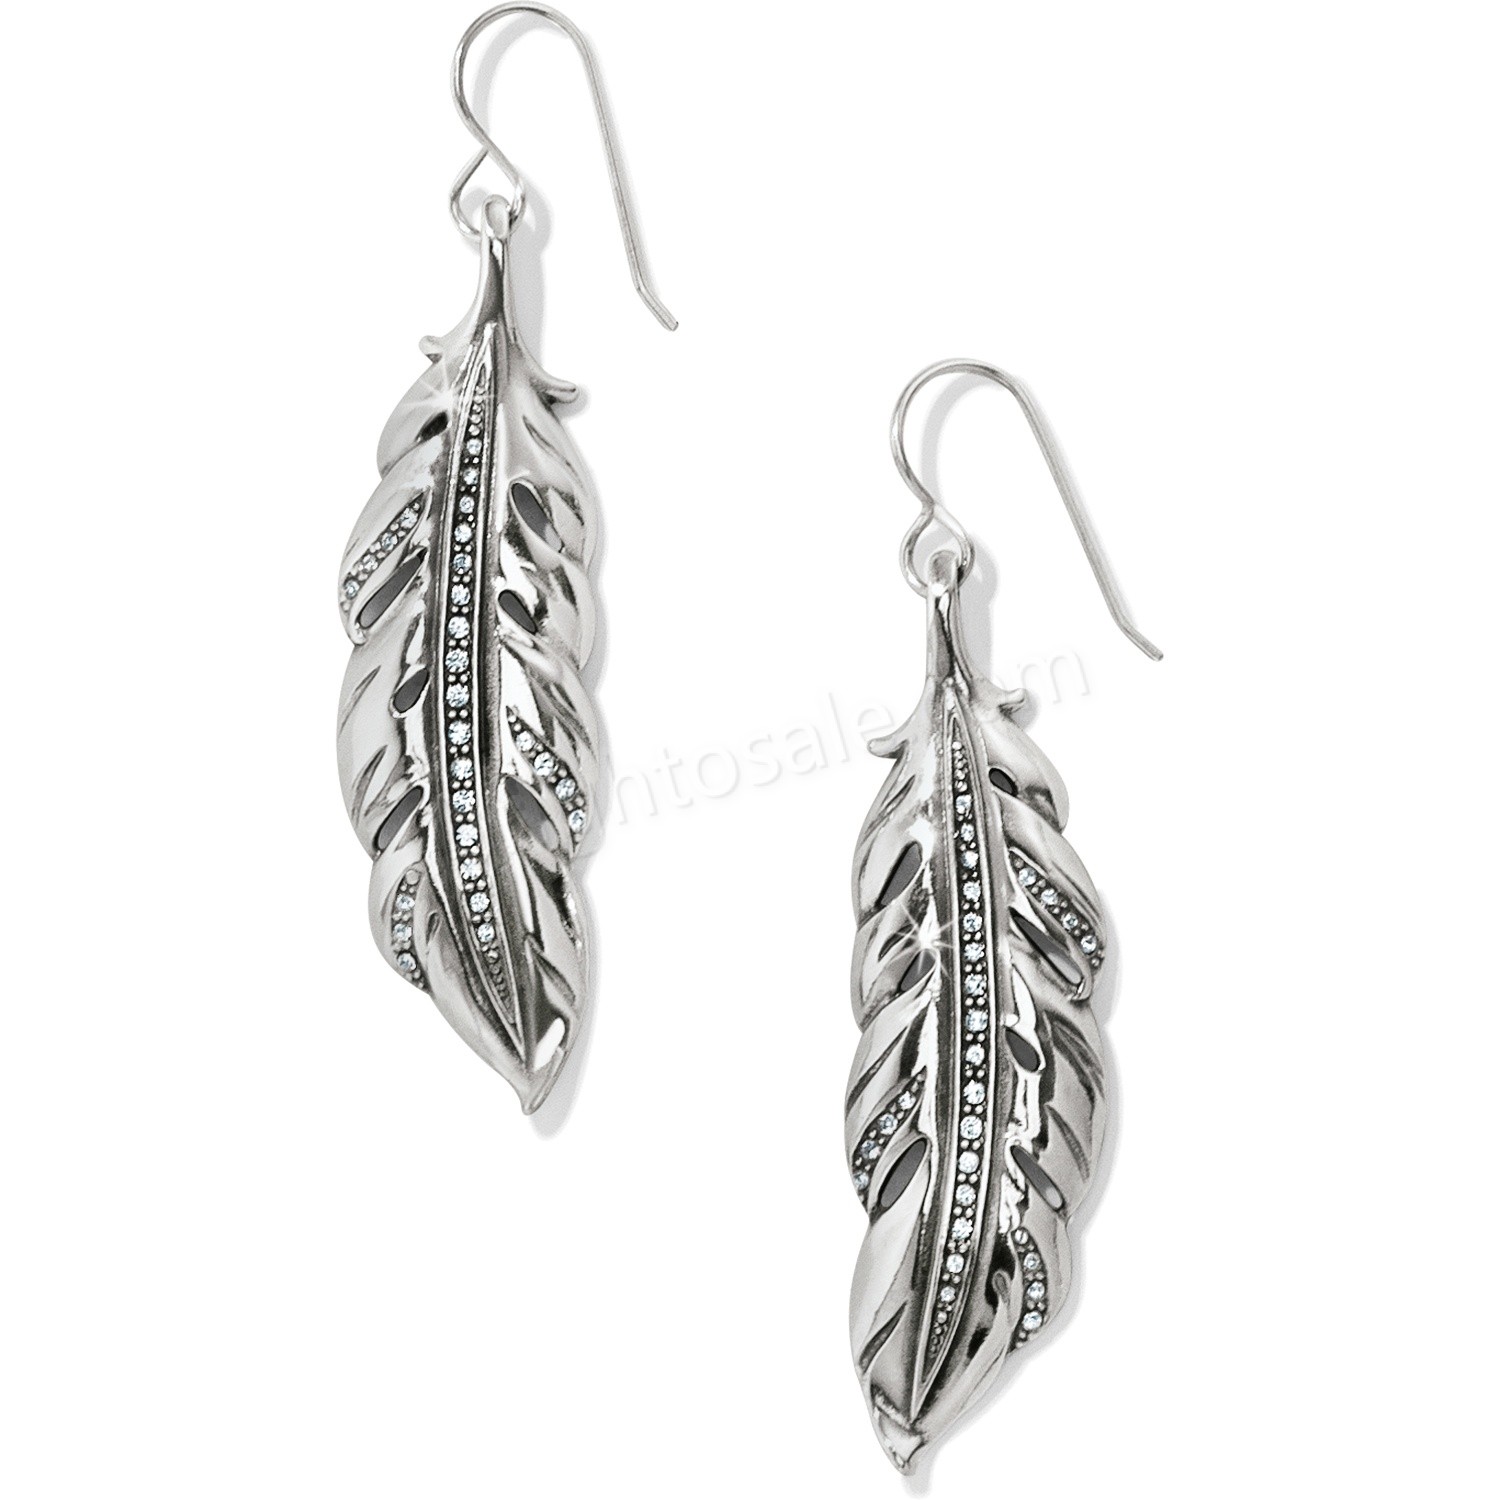 Brighton Collectibles & Online Discount Contempo Ice Feather French Wire Earrings - Brighton Collectibles & Online Discount Contempo Ice Feather French Wire Earrings